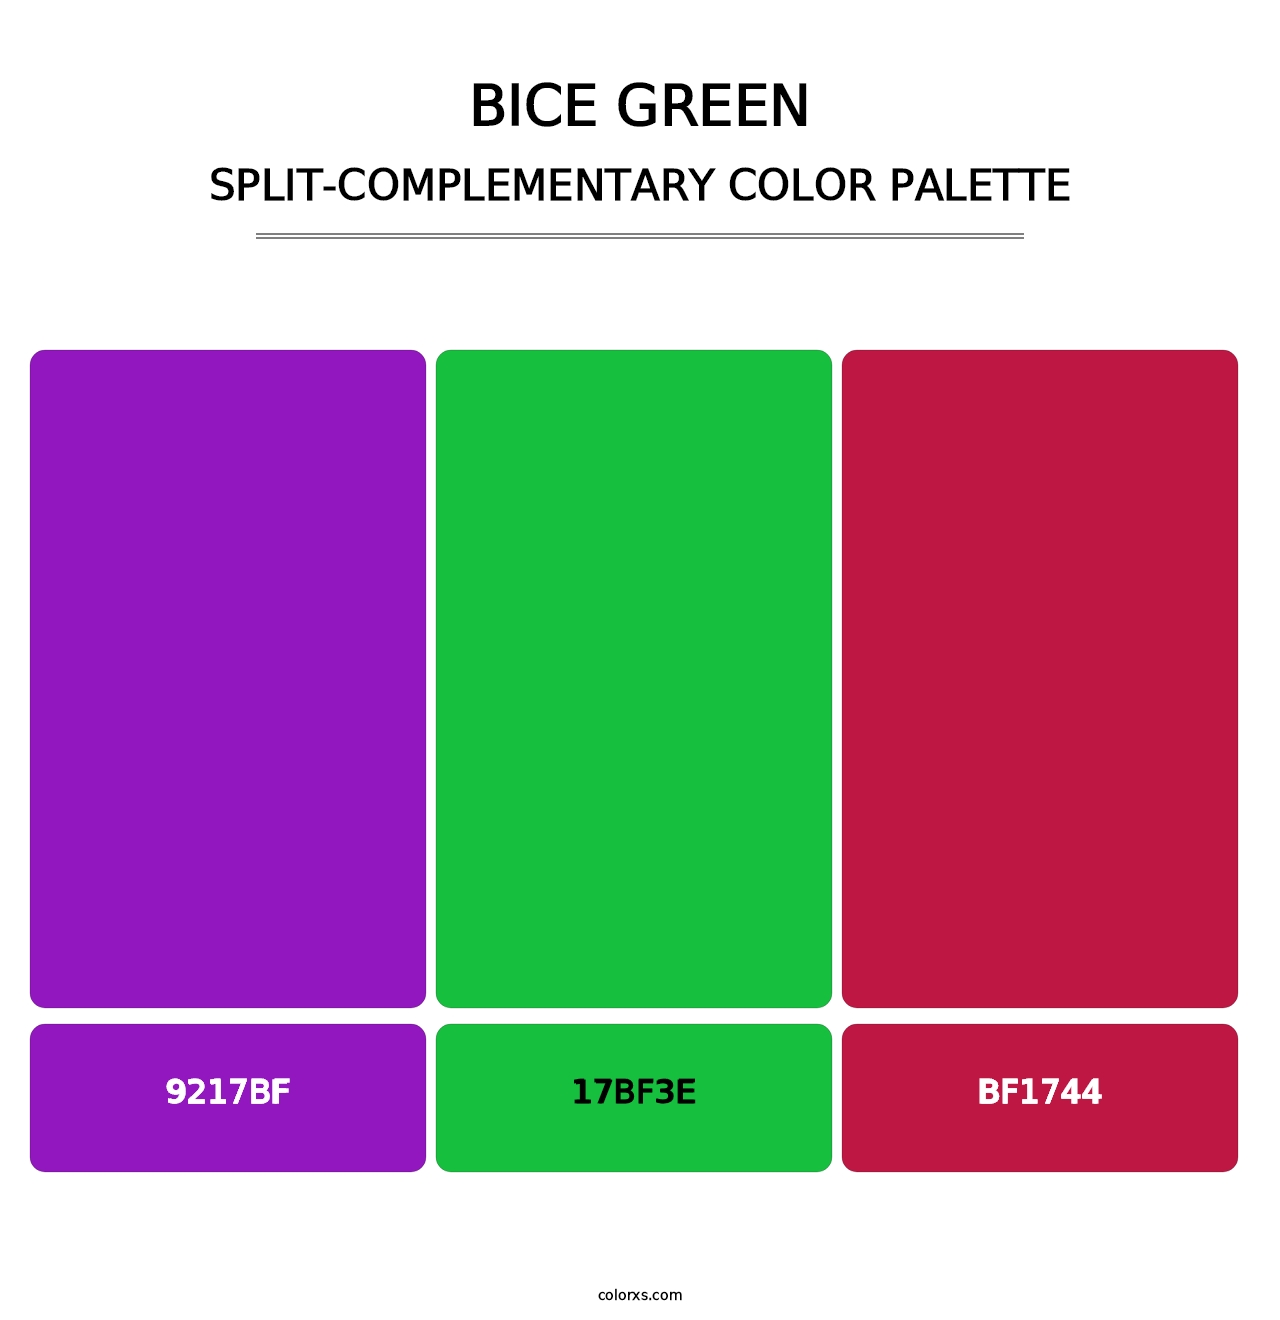 Bice Green - Split-Complementary Color Palette